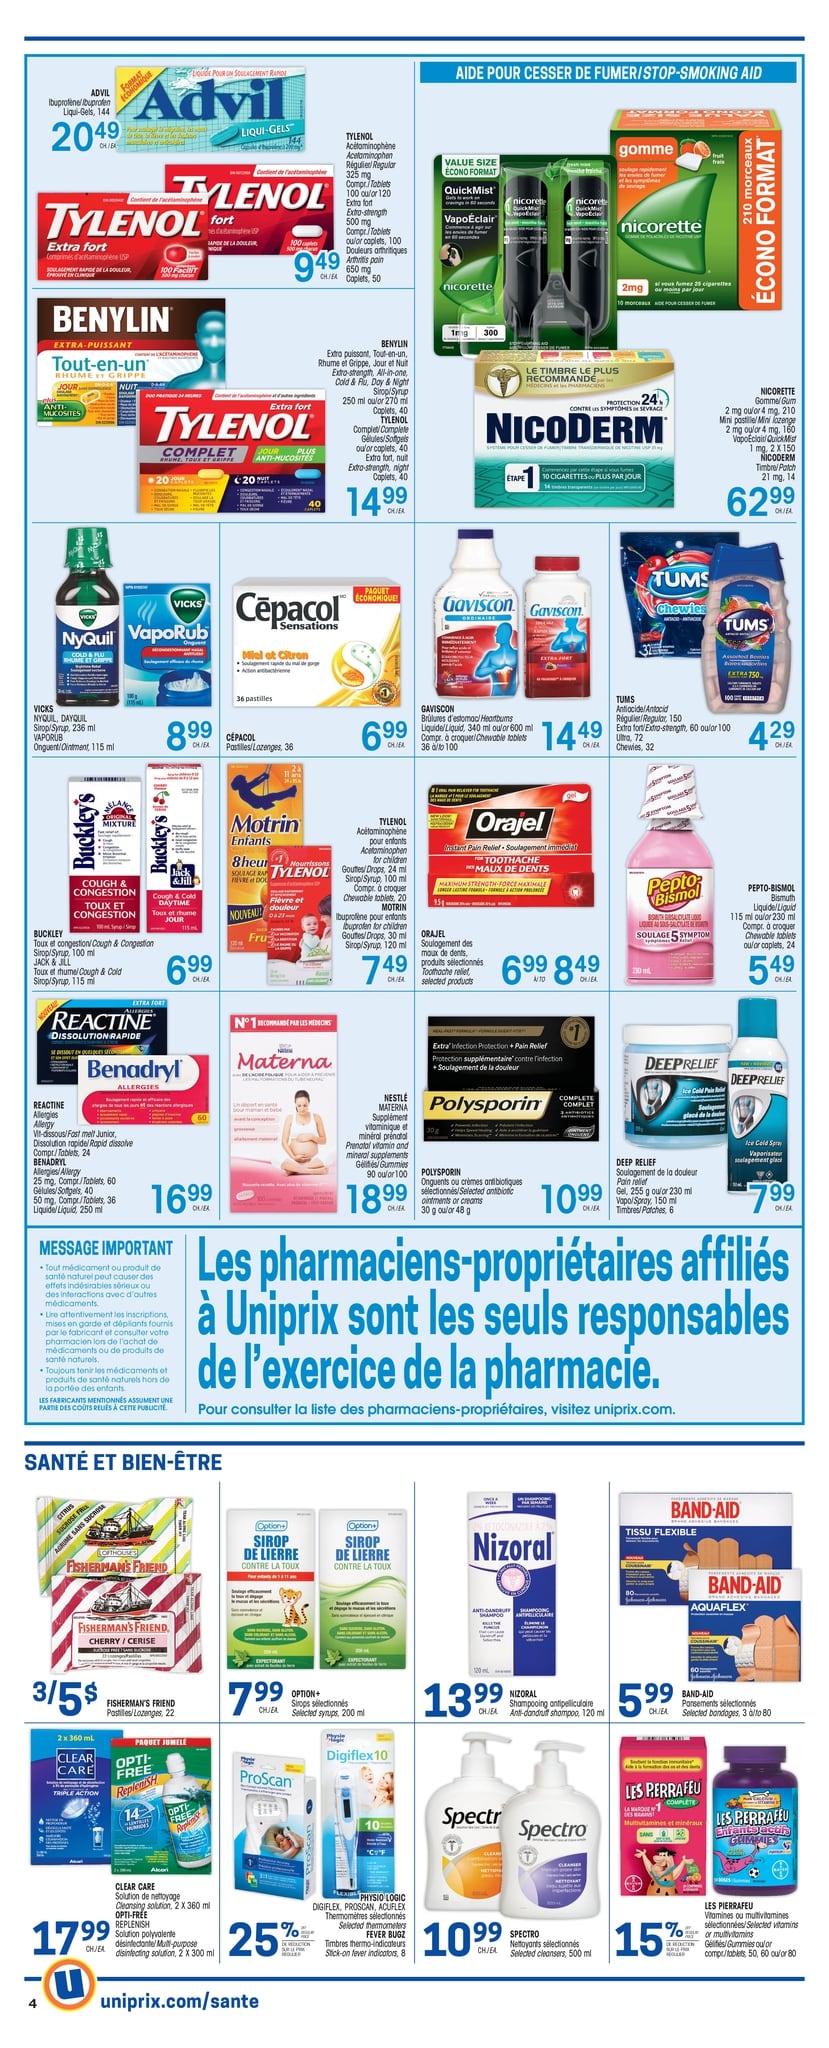 Uniprix - Weekly Flyer Specials - Page 10